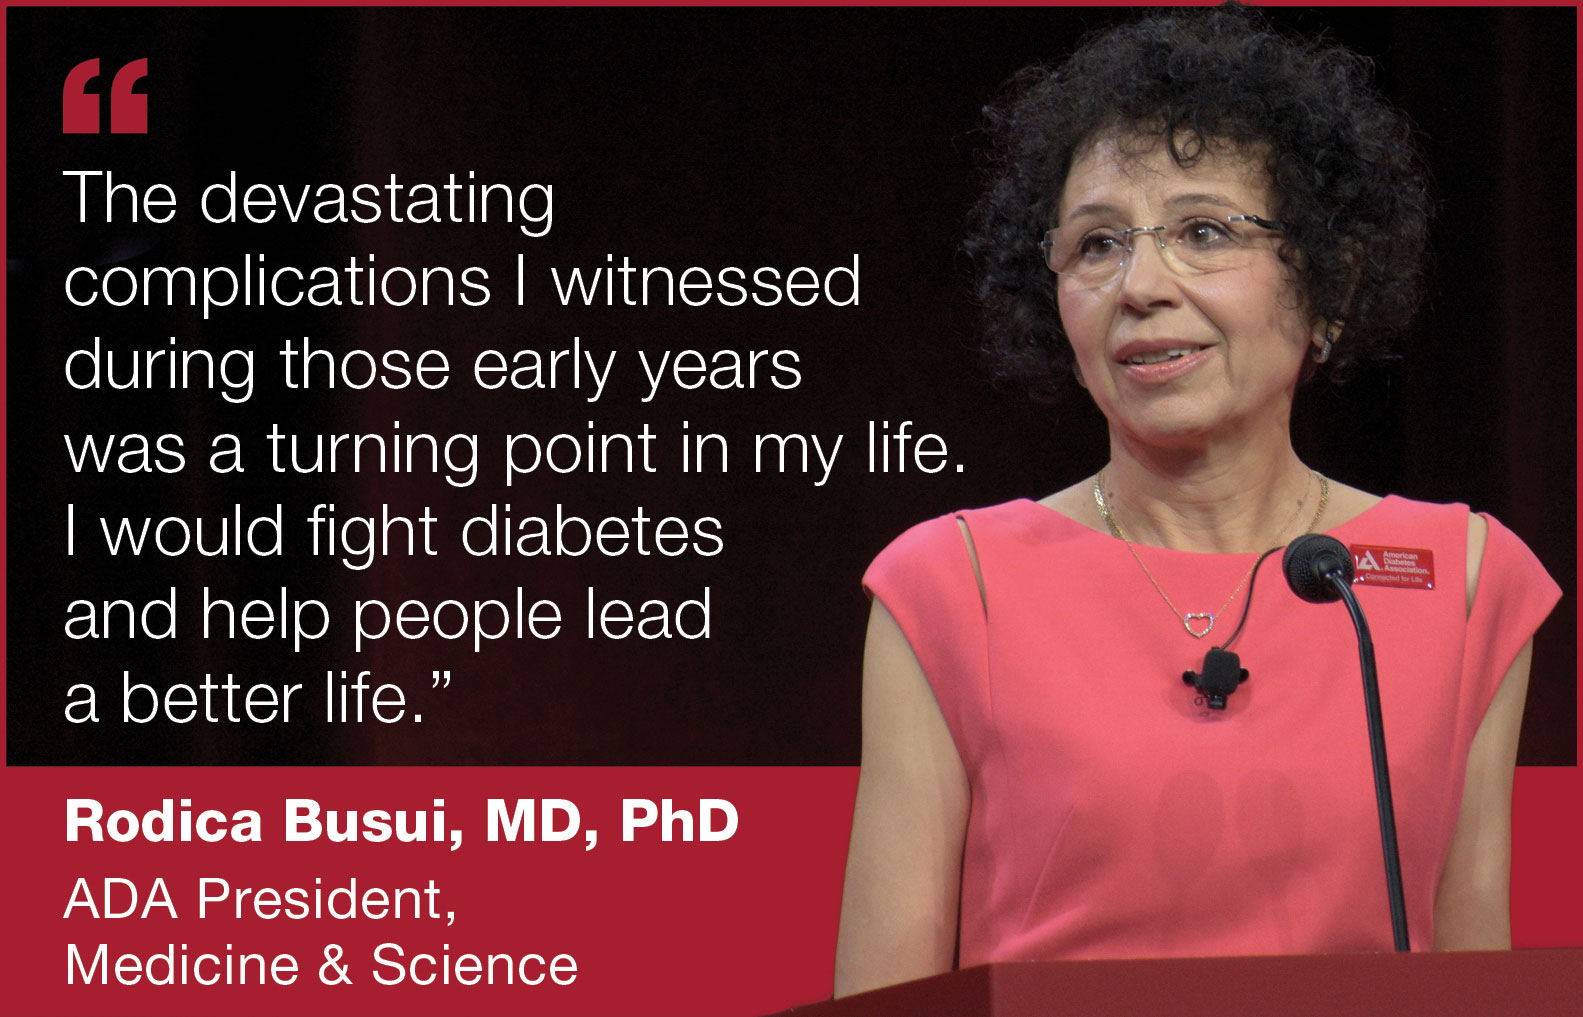 ADA President of Medicine & Science shares her journey in diabetes research